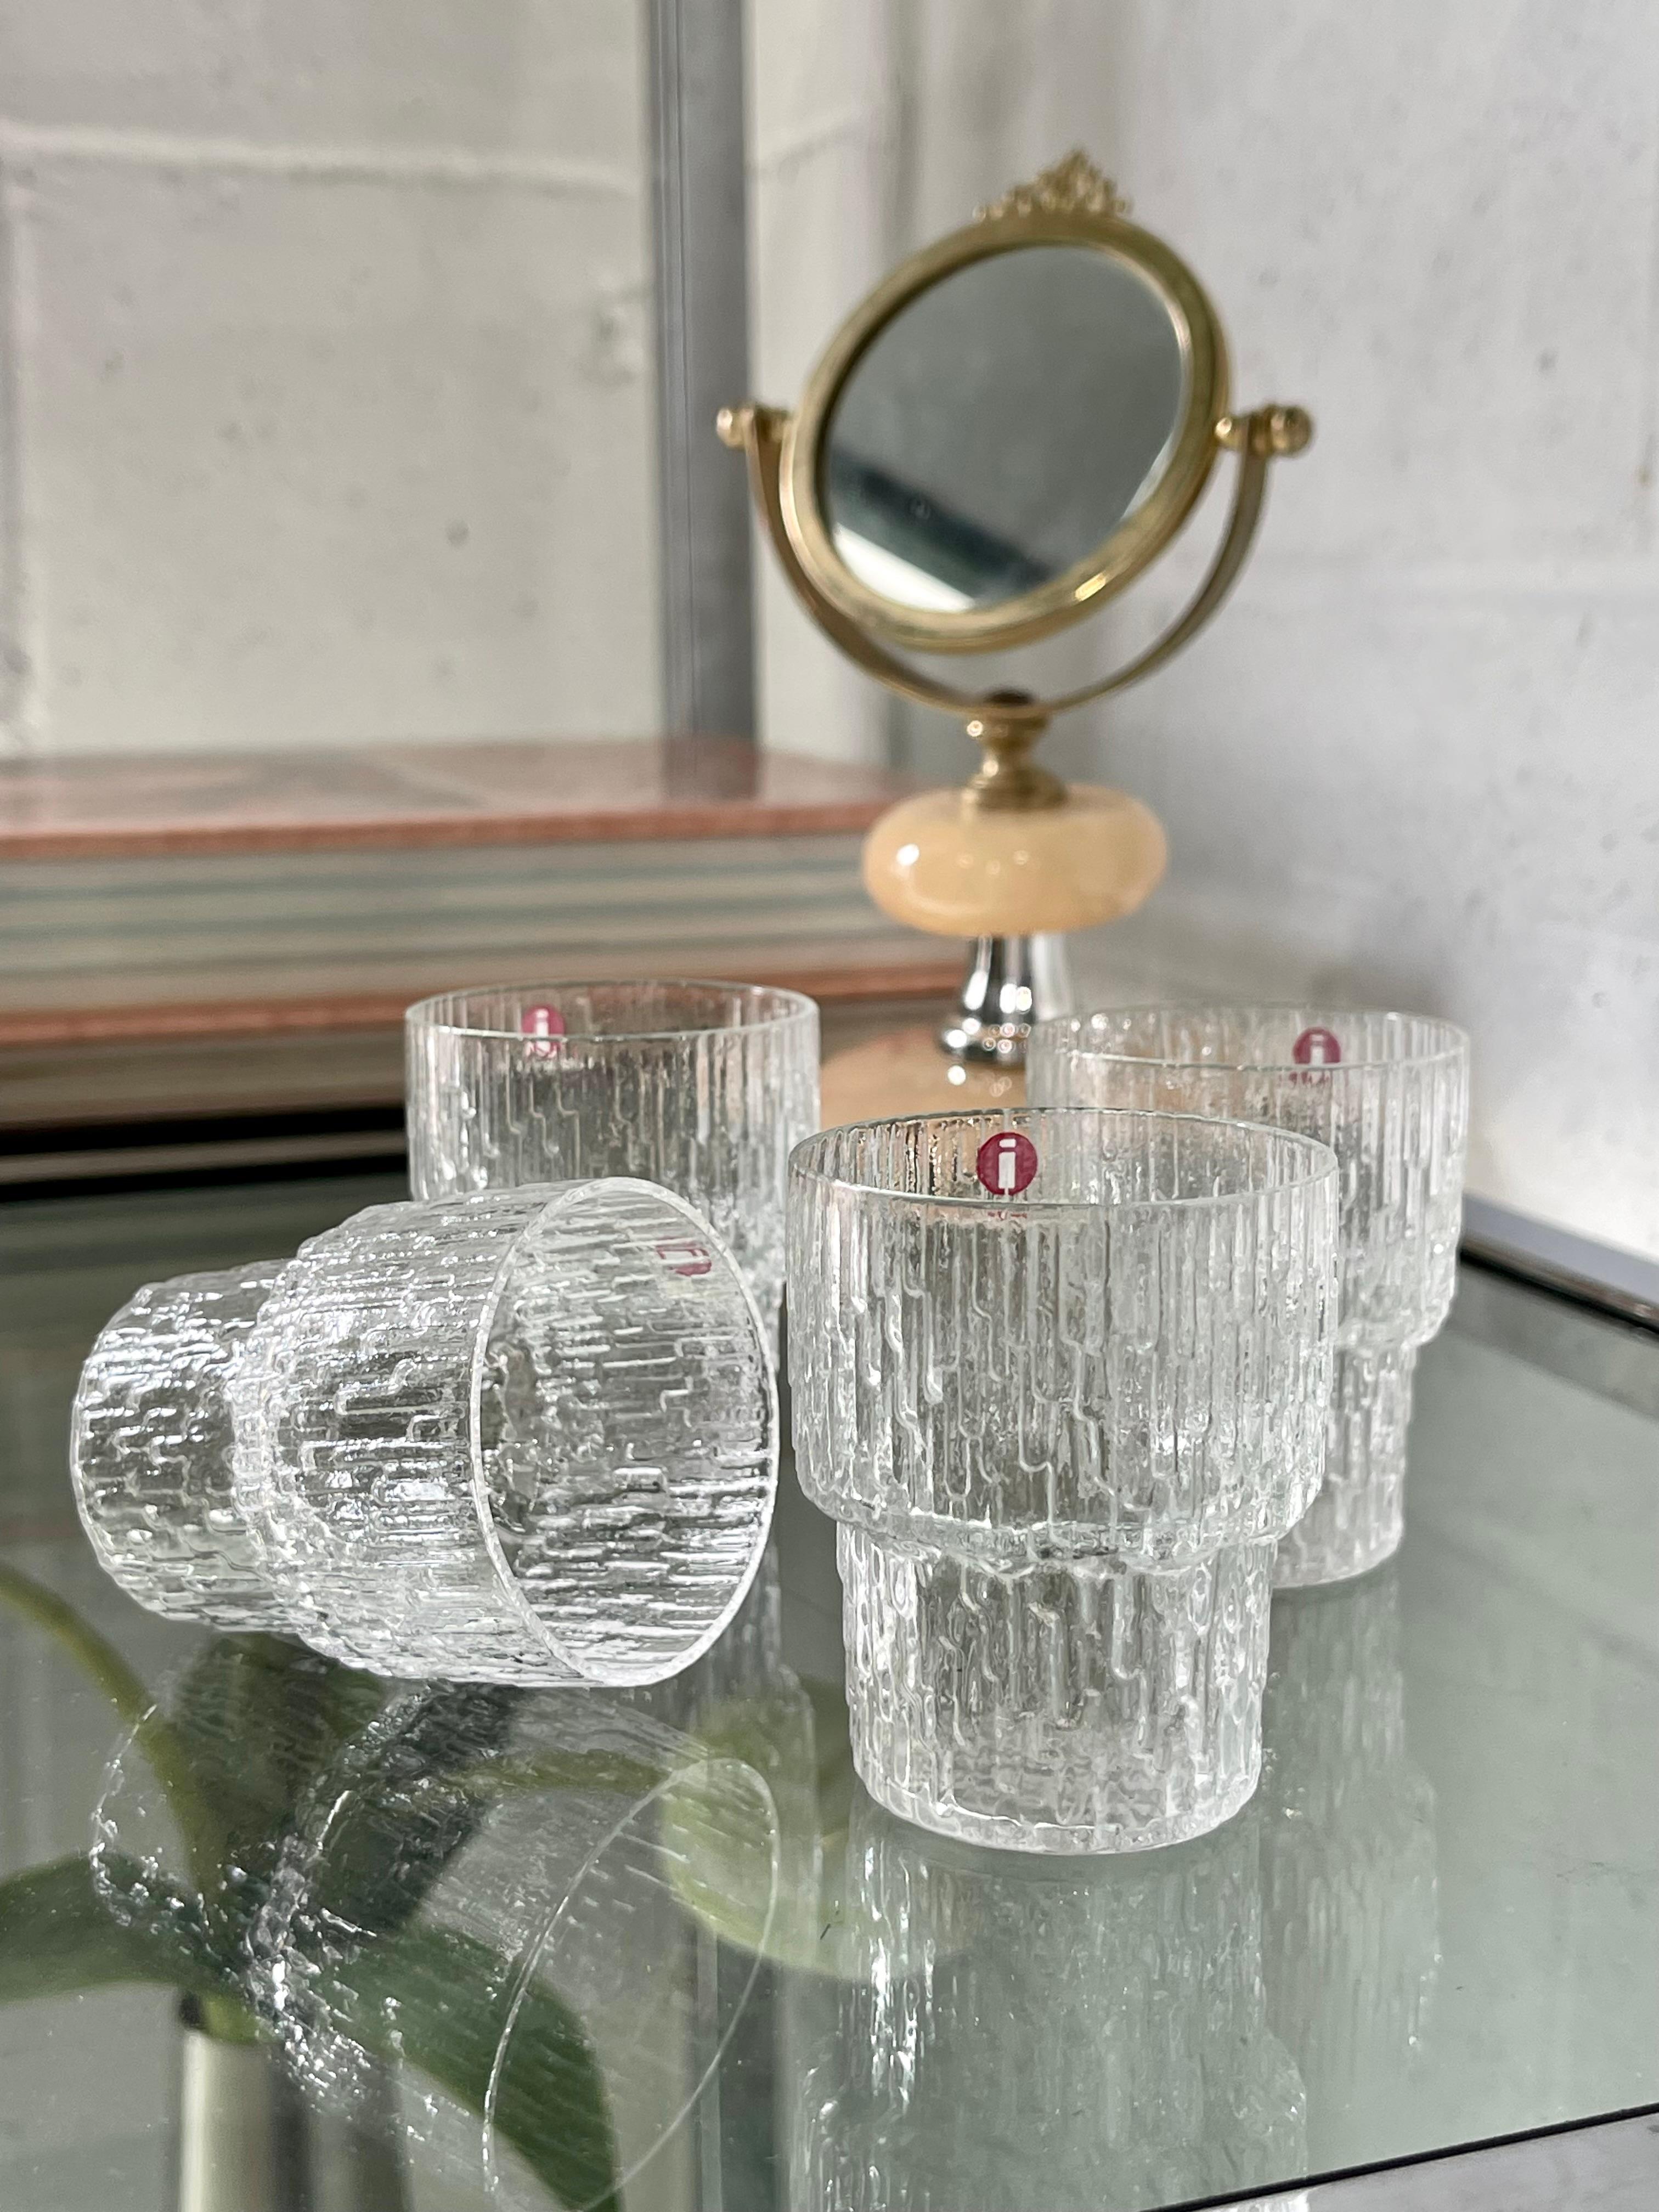 Dazzling set of 4 iittala Finland shot glasses. Designed by Tapio Wirkkala for the glass series Paadar, circa the 1960’s. 

Eye catching, brutal-esque design, which seems to be mimicking columns of melting glacial ice. 

In fantastic vintage